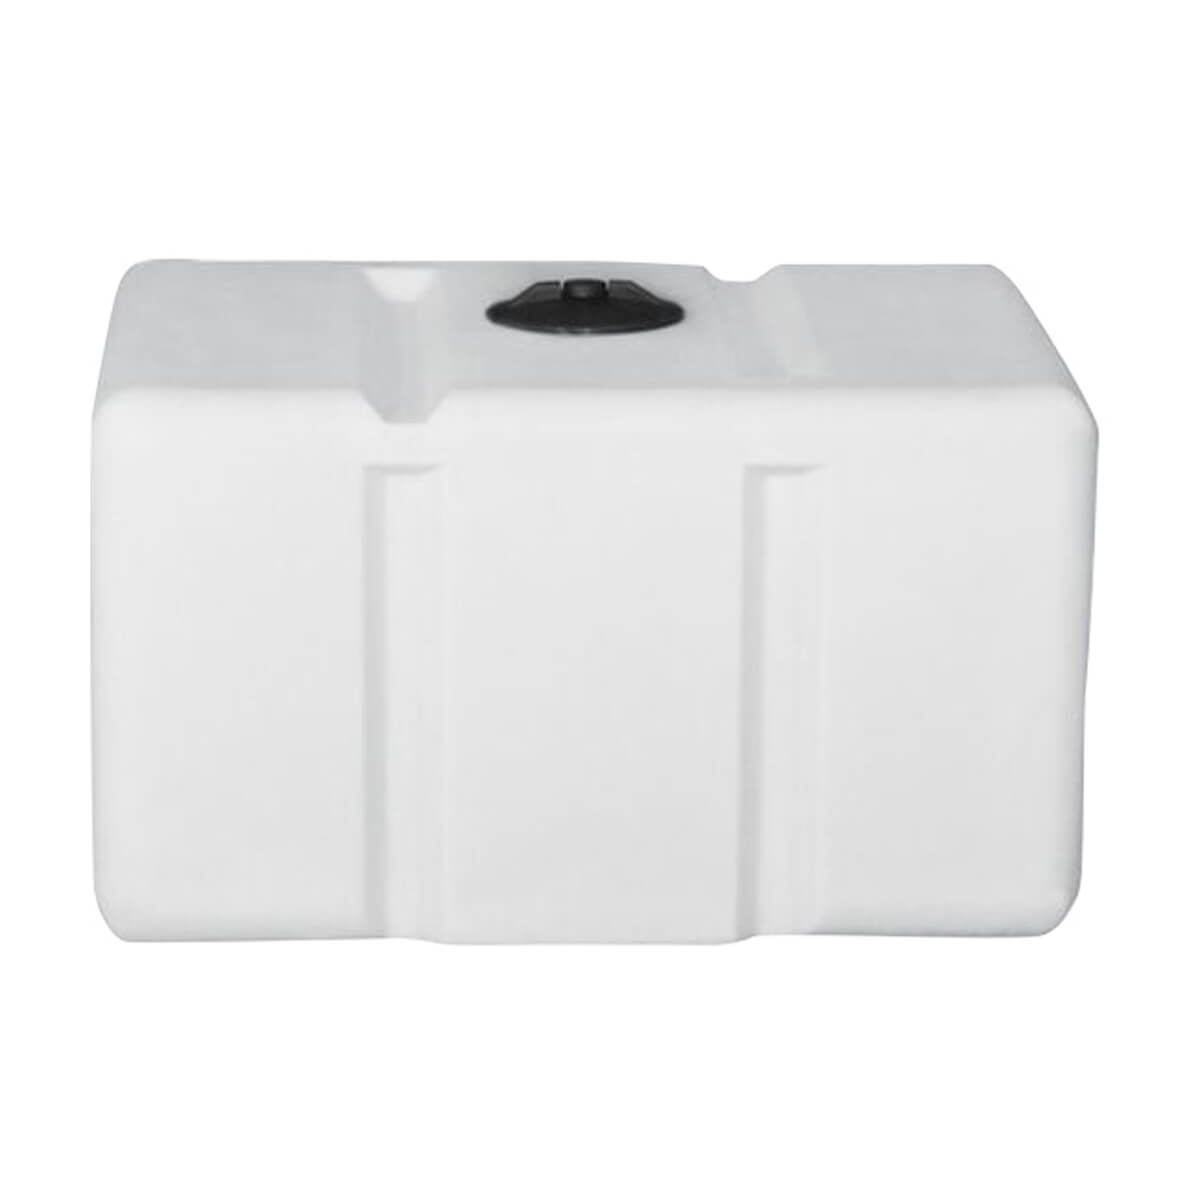 Loaf Style Transport Water Tank - White - 200 Gal